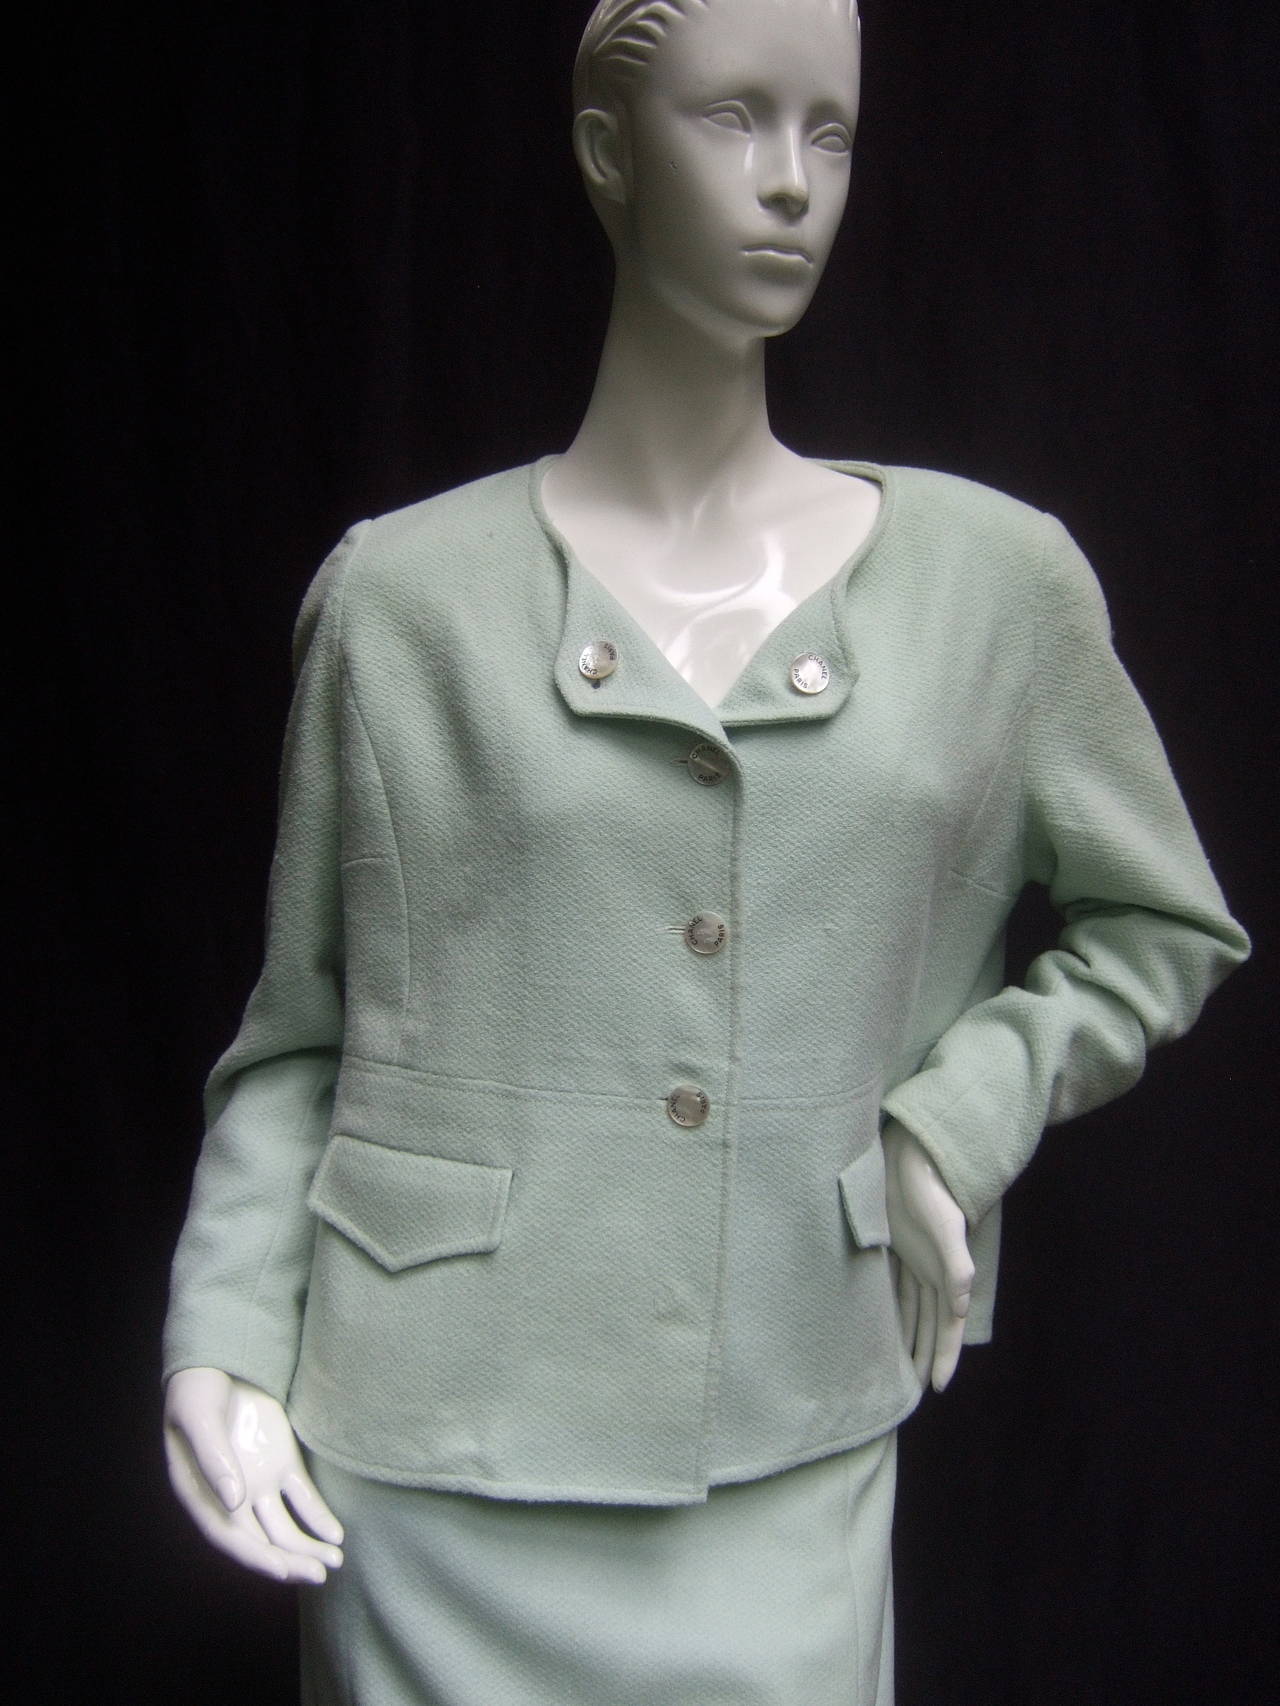 Women's Chanel Boutique Chic Mint Green Wool Skirt Suit  c 1990